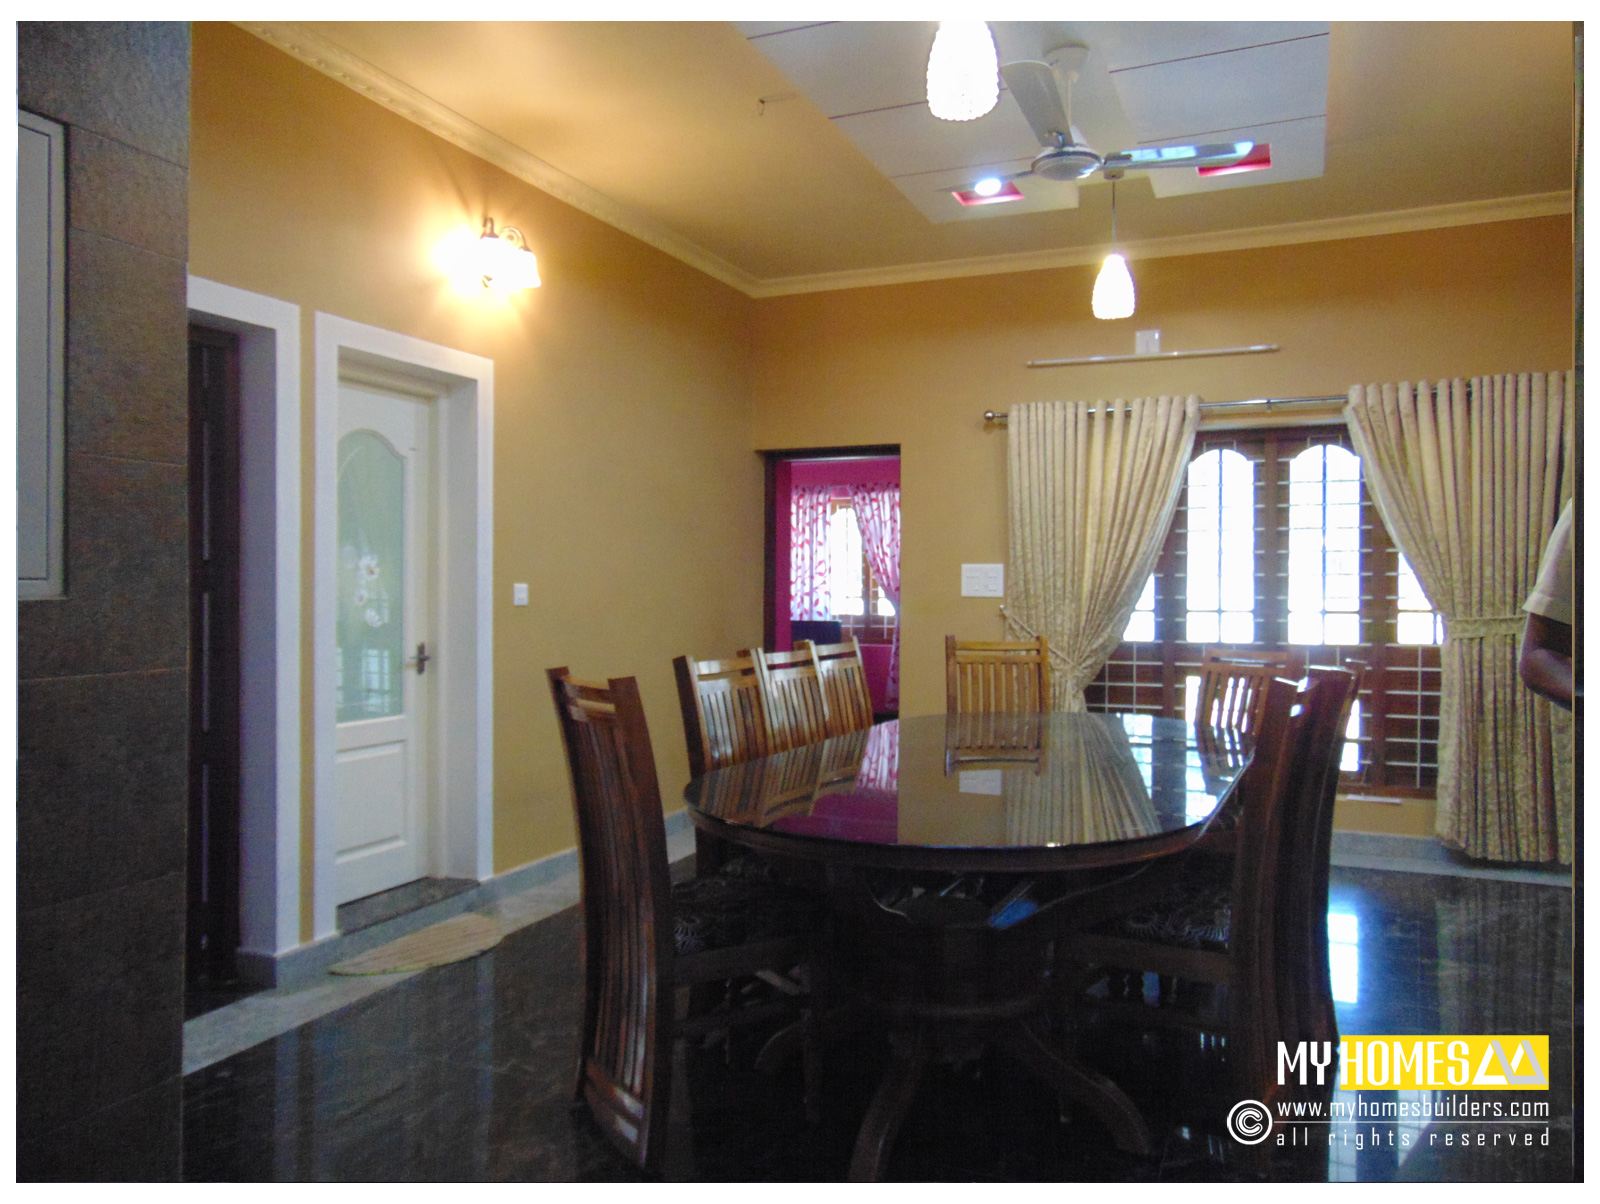 keral house dining room tables, dining room table design in Kerala, Kerala houses ding table designs